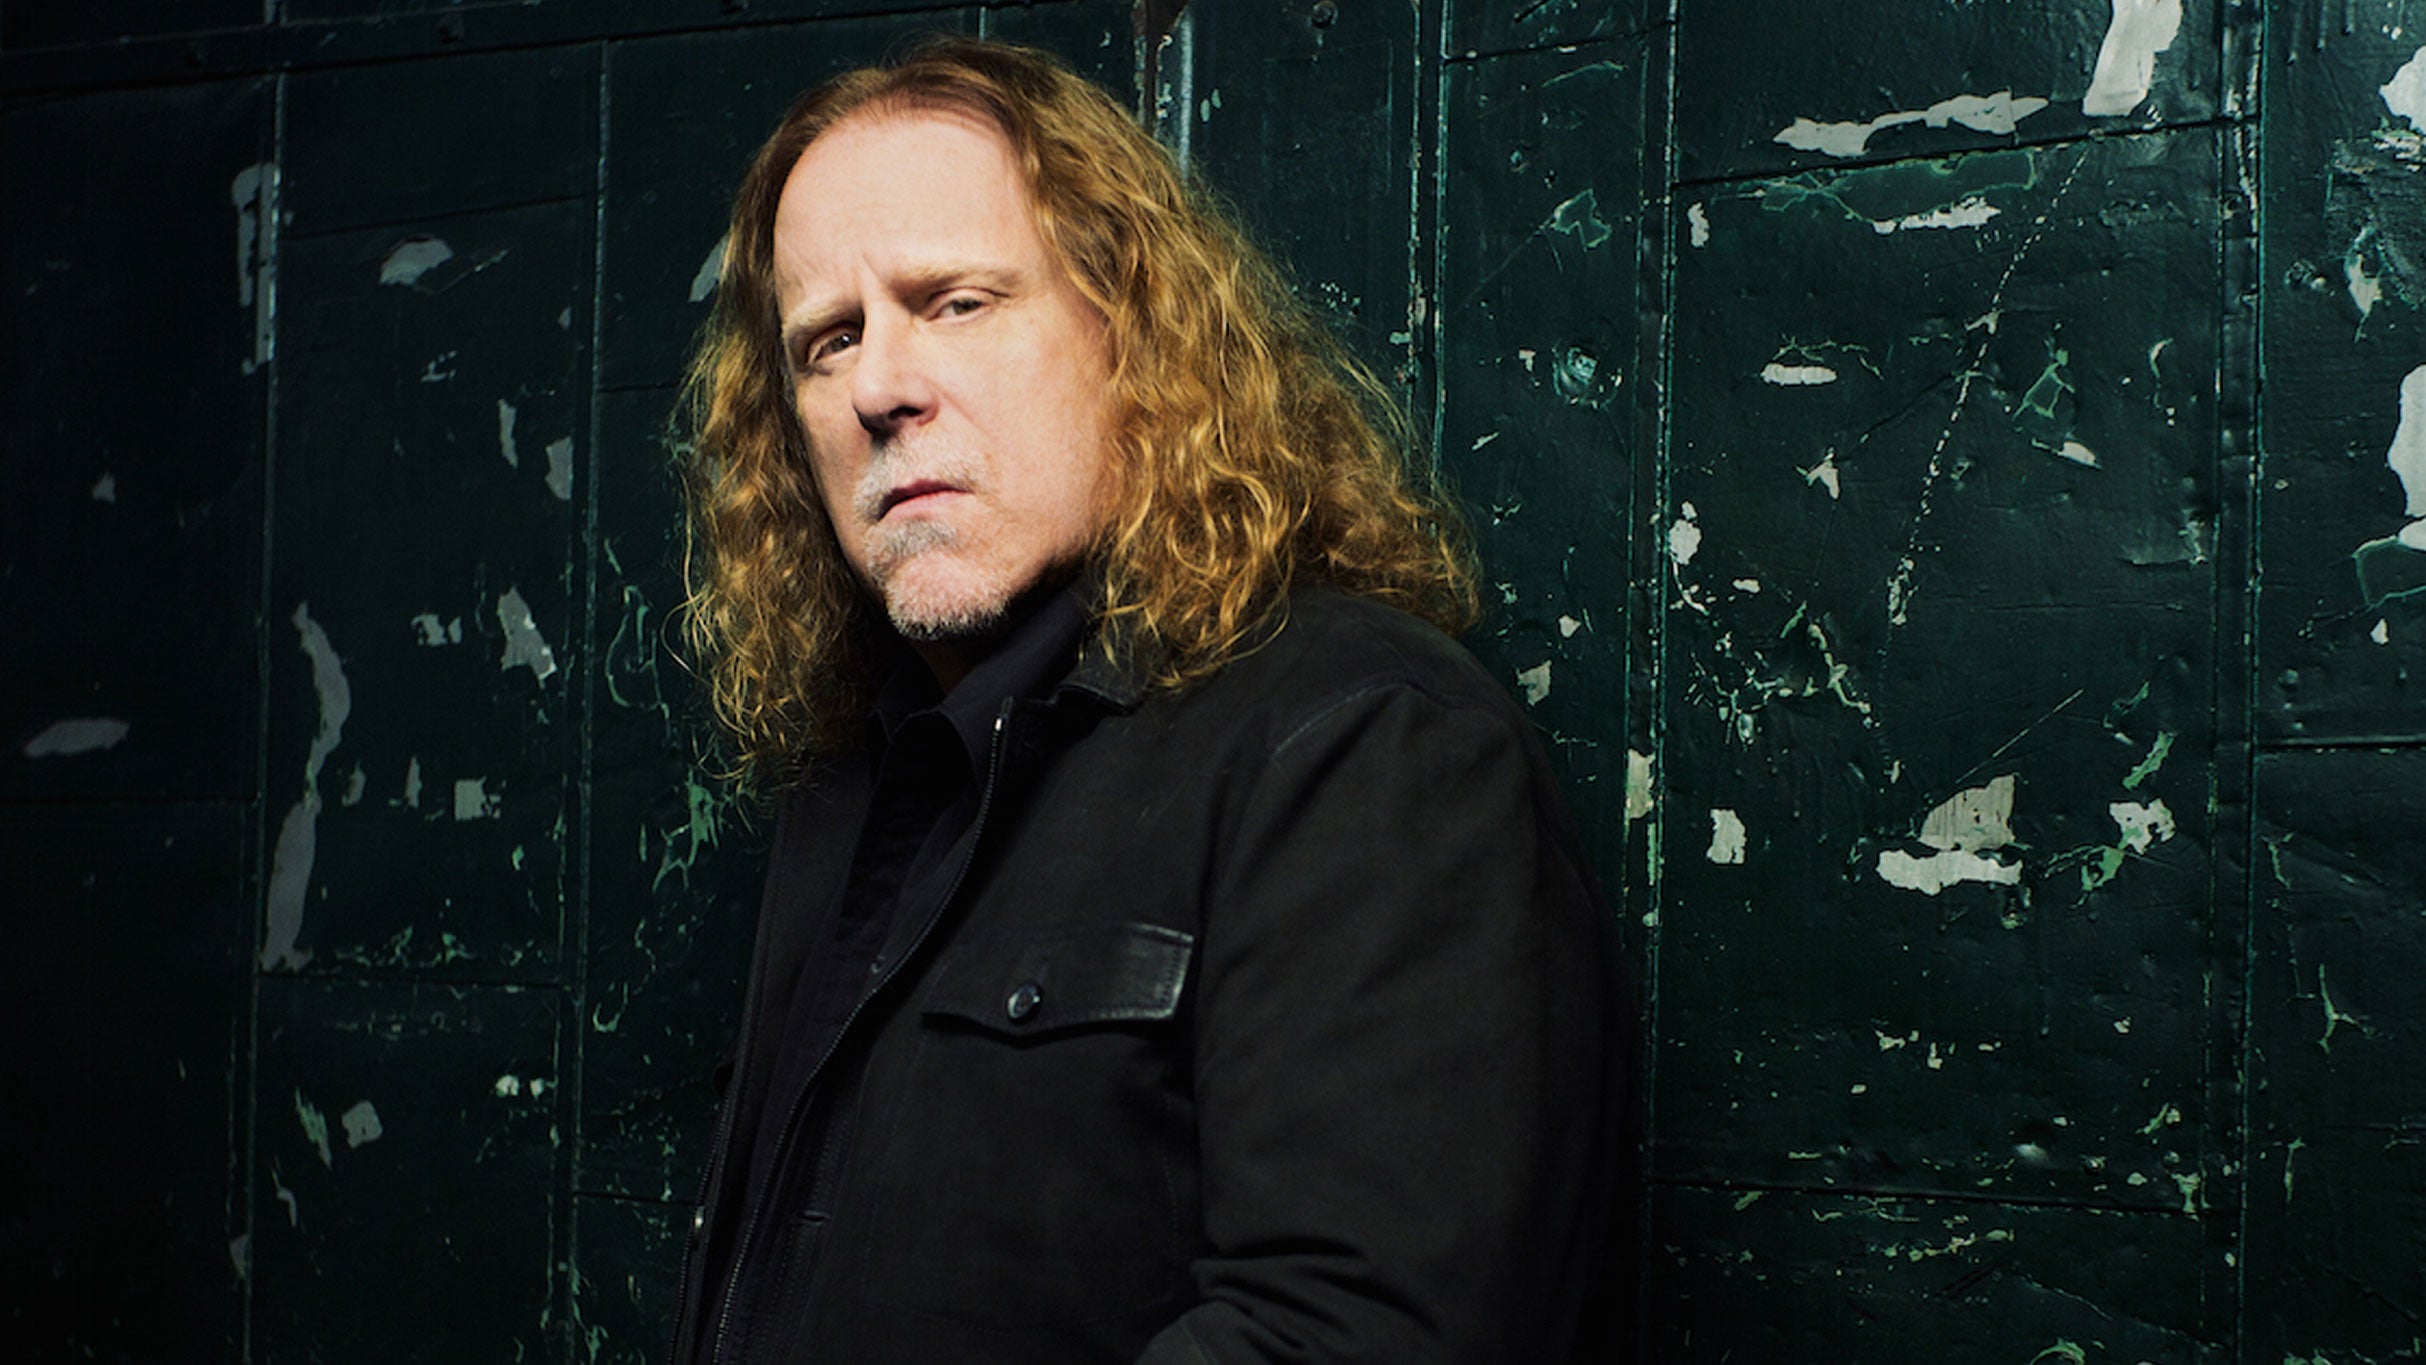 presale pa55w0rd for WARREN HAYNES BAND and DREAMS & SONGS SYMPHONIC EXPERIENCE tickets in Boston - MA (Leader Bank Pavilion)